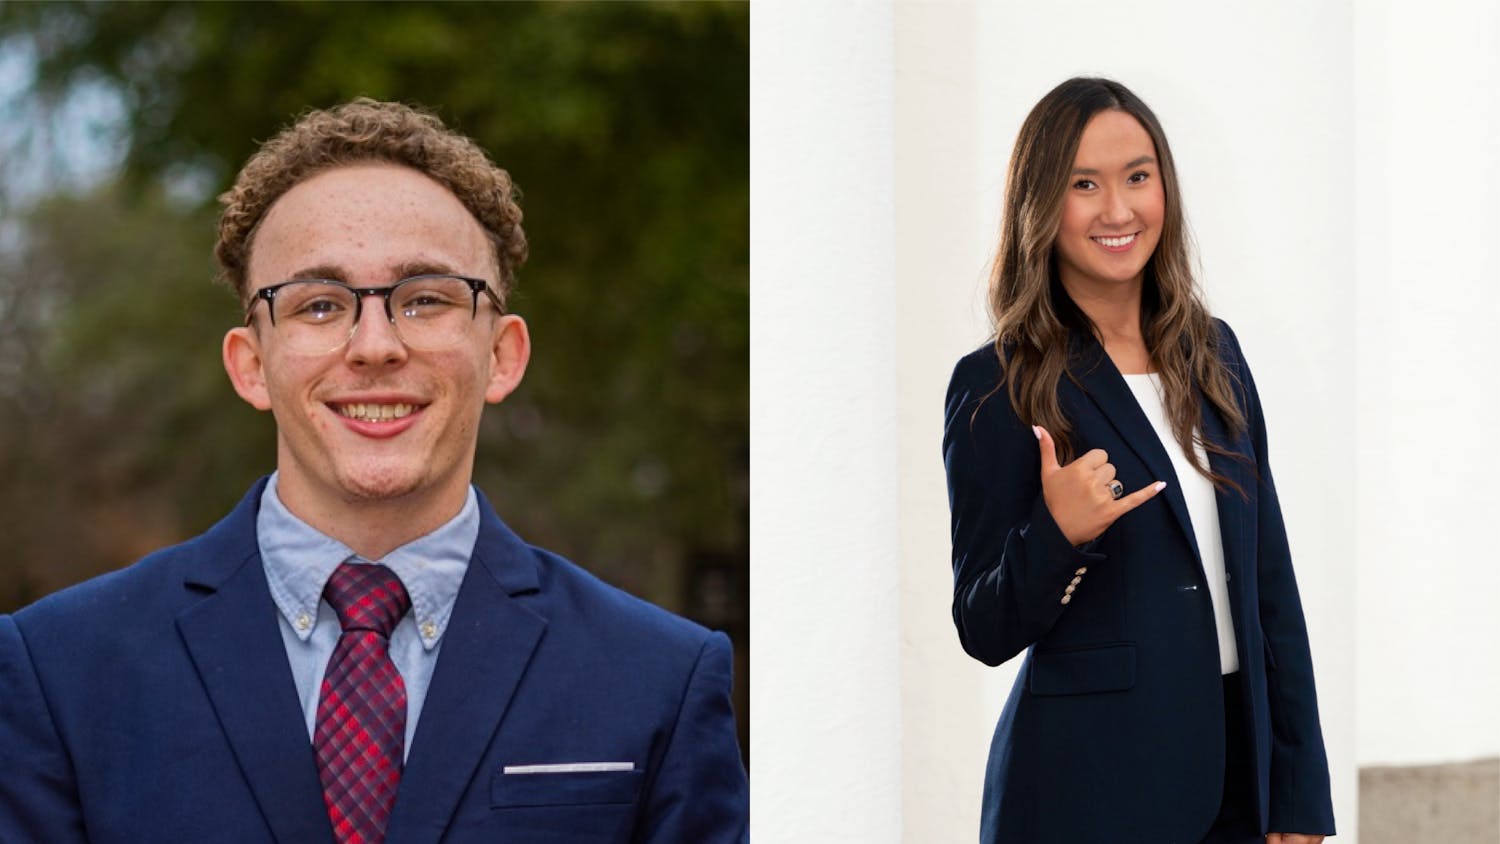 Reilly Arford (left) and Emily "Emmie" Thompson (right) are the candidates running to be the next student body president. Students can vote for candidates from Feb. 21 at 9 a.m. to Feb. 22 at 5 p.m.&nbsp;